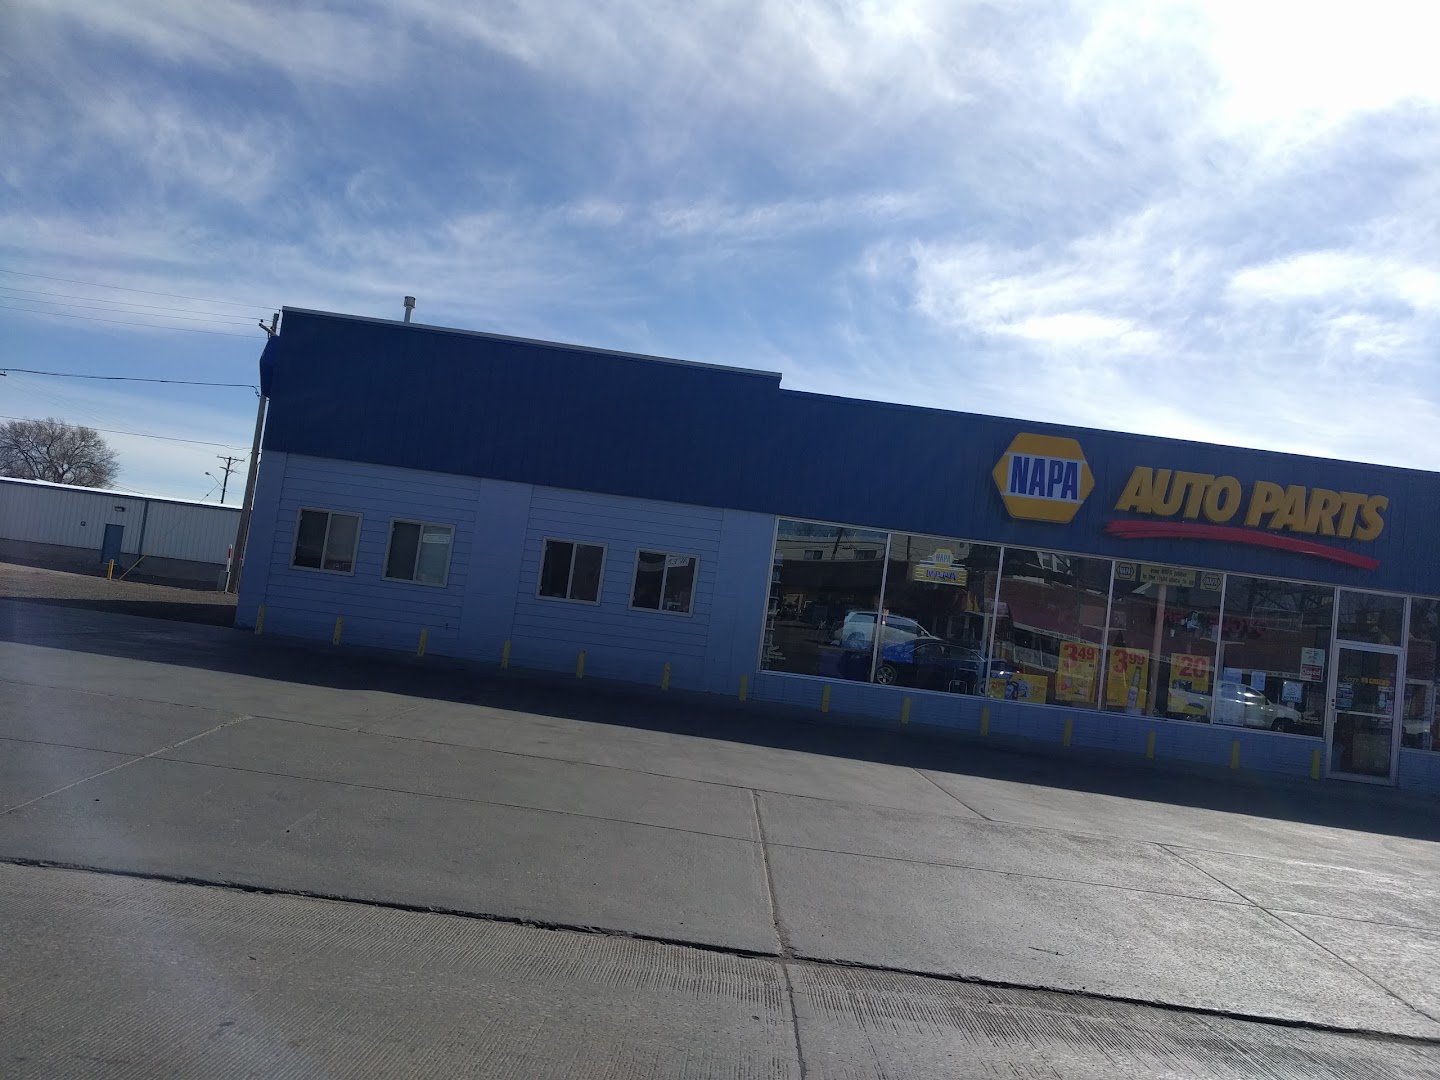 Auto parts store In Cheyenne WY 